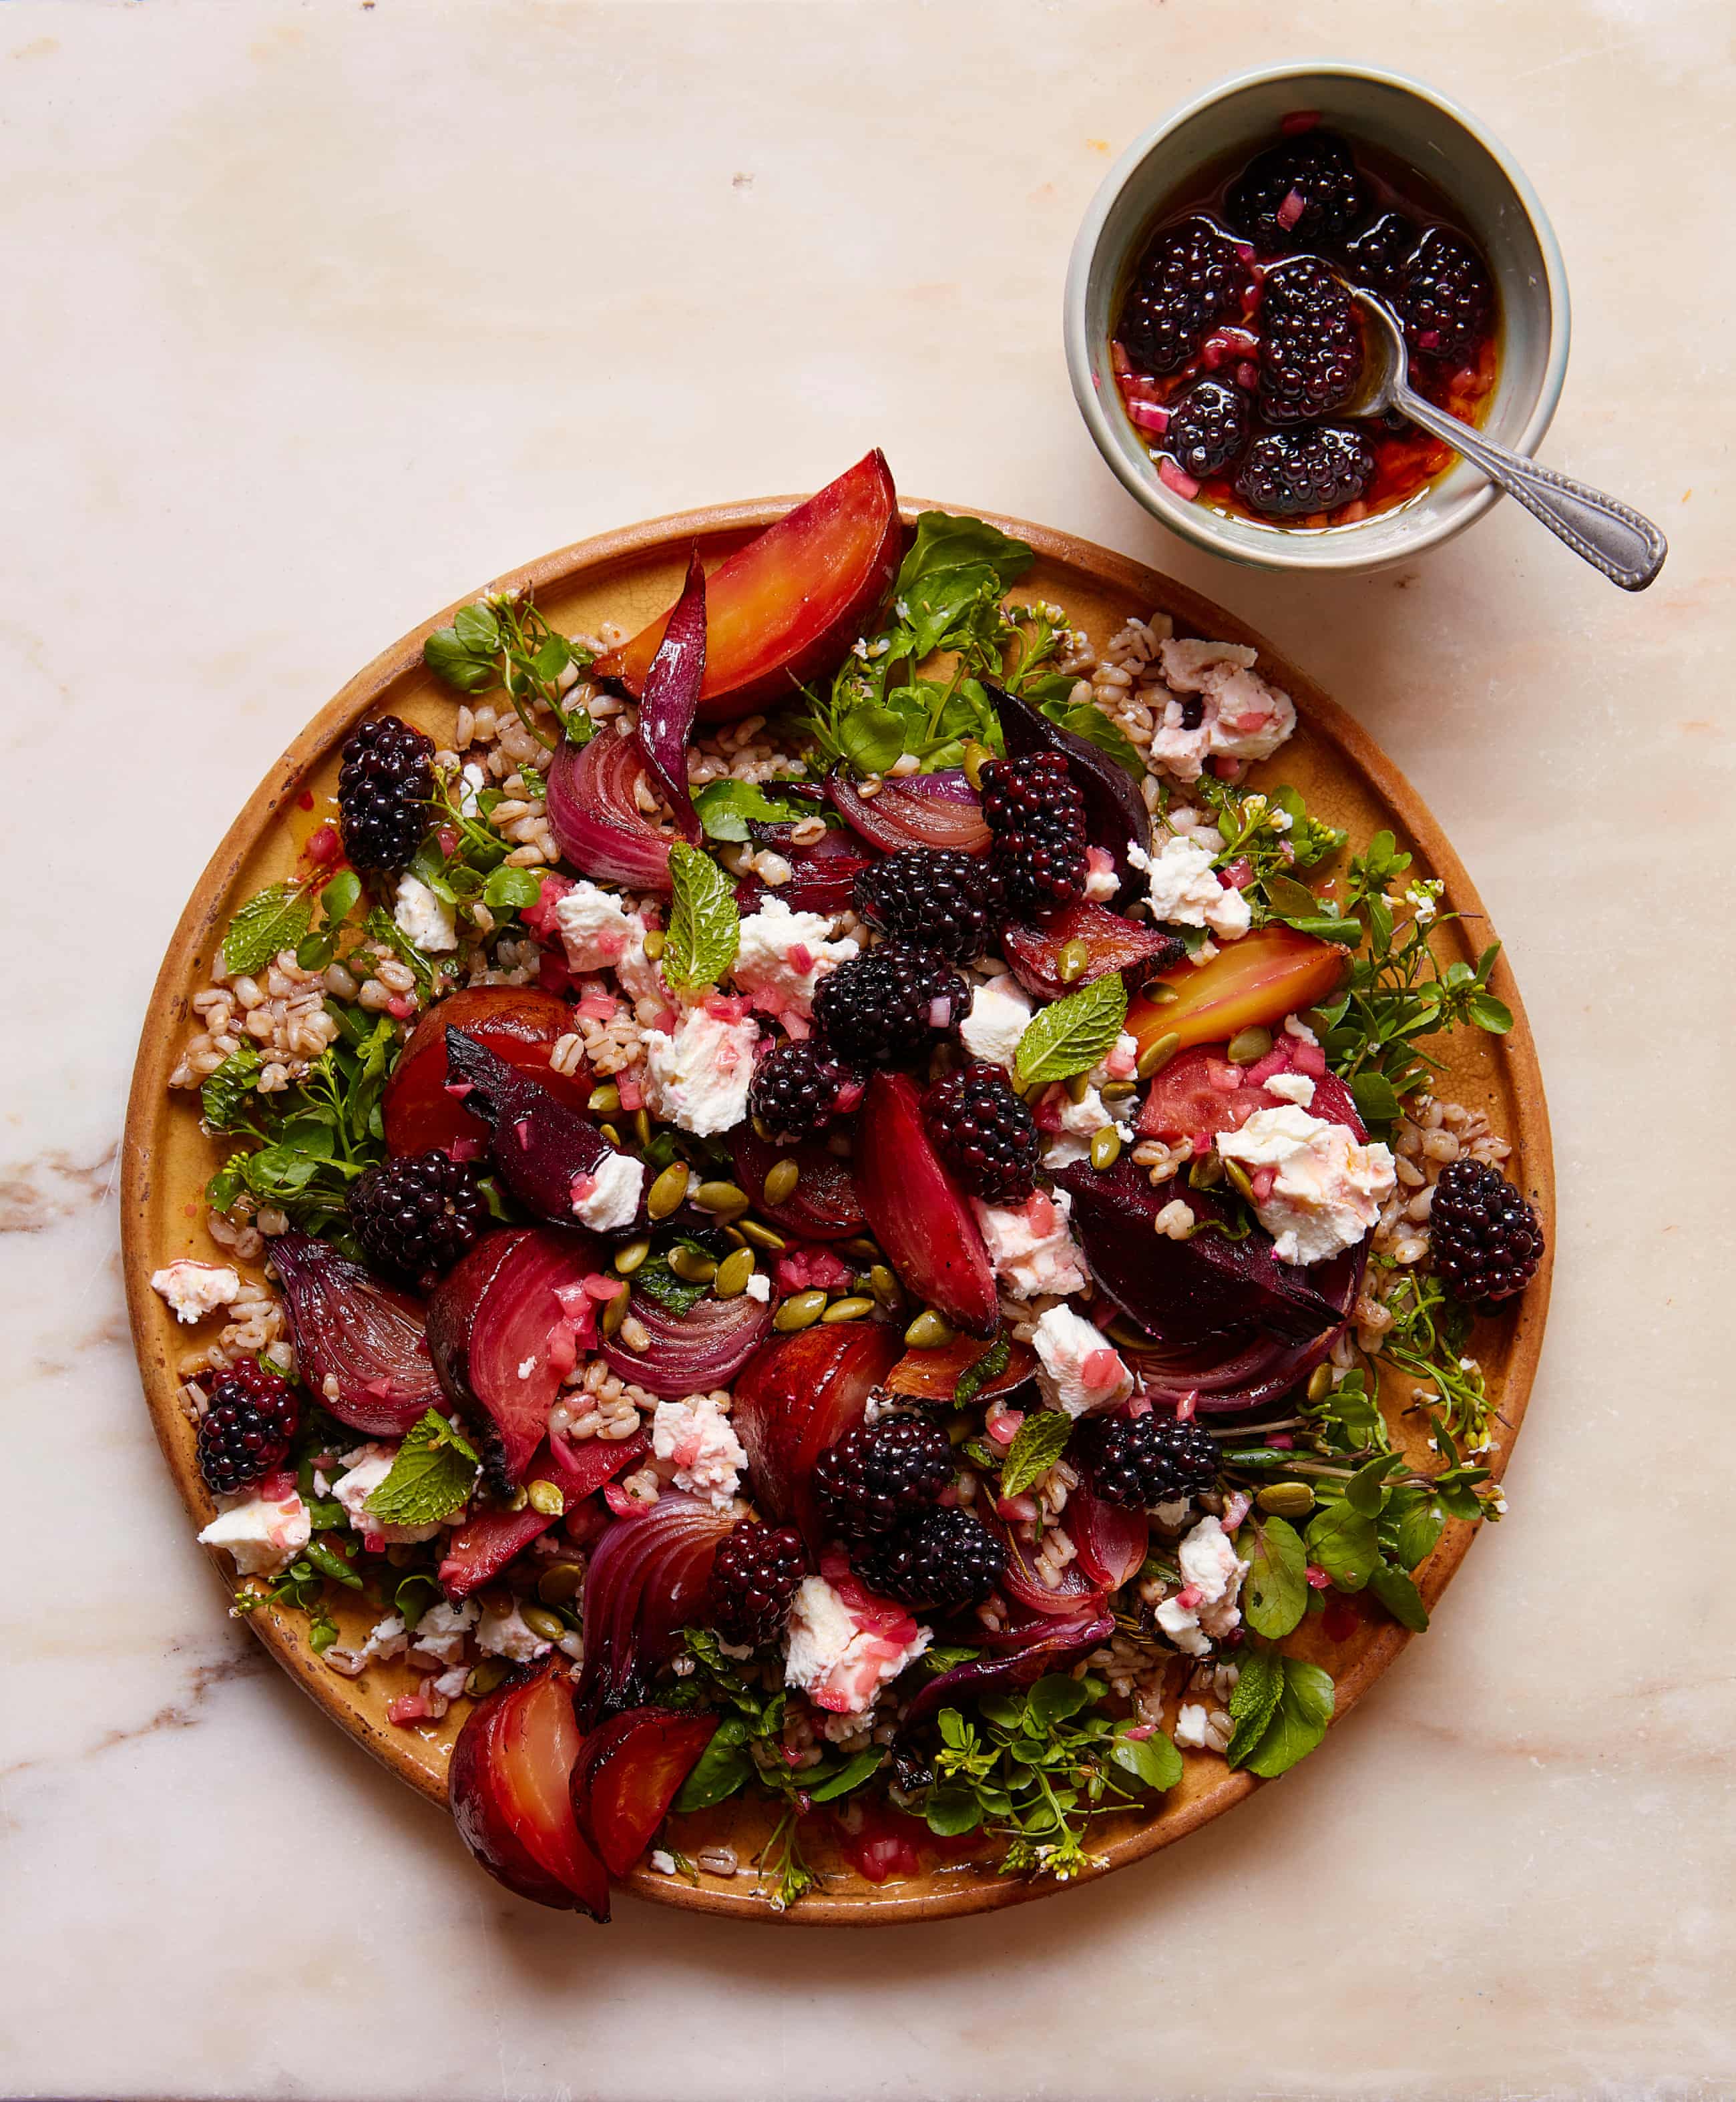 Thomasina Miers’ recipe for roast beet, blackberry and barley salad with goat’s cheese